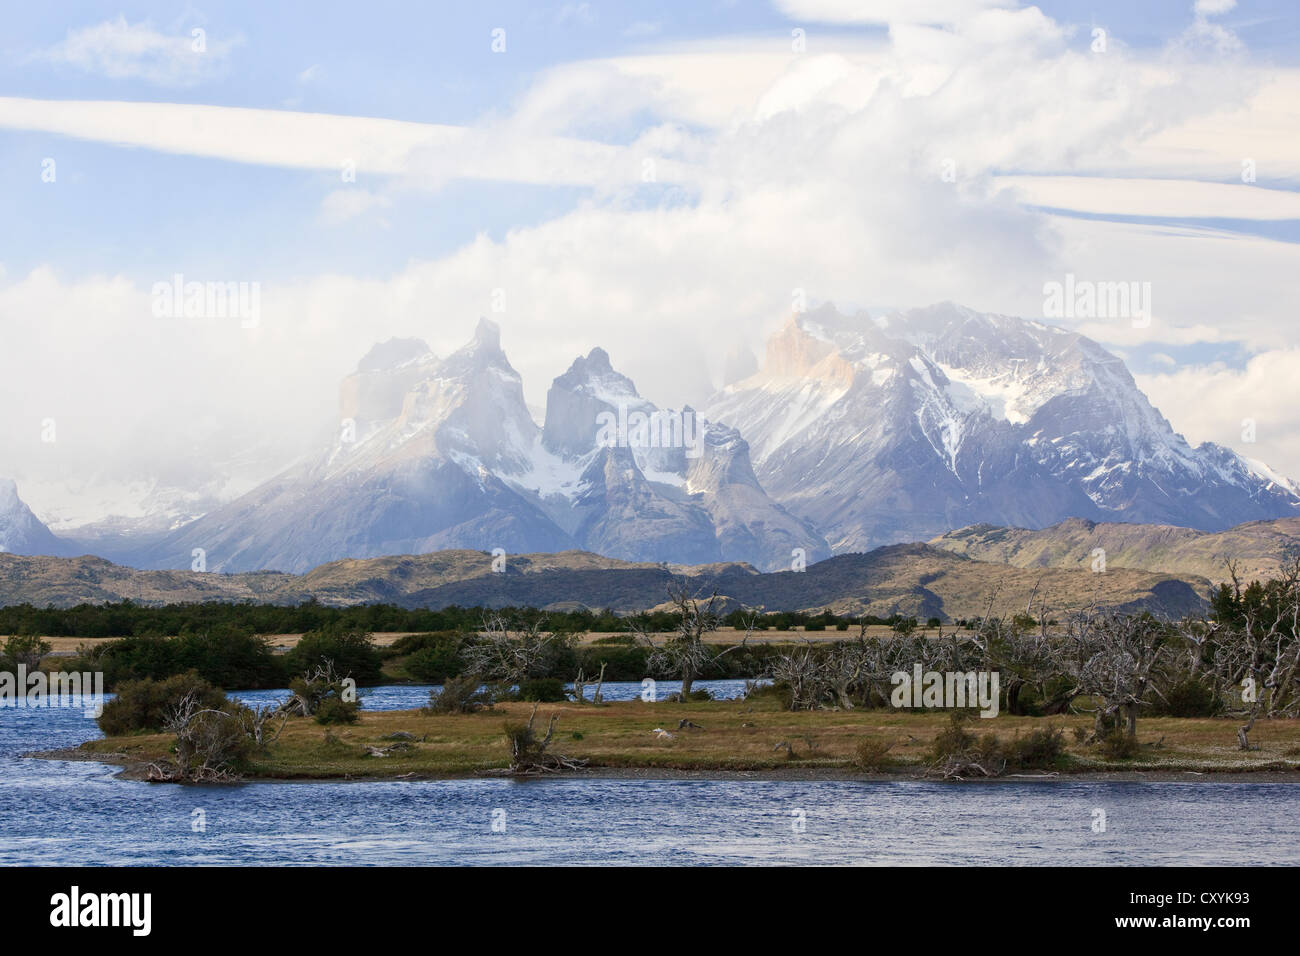 View of the Cuernos del Paine granite mountains, Torres del Paine National Park, as seen from banks of a glacial river, lake Stock Photo